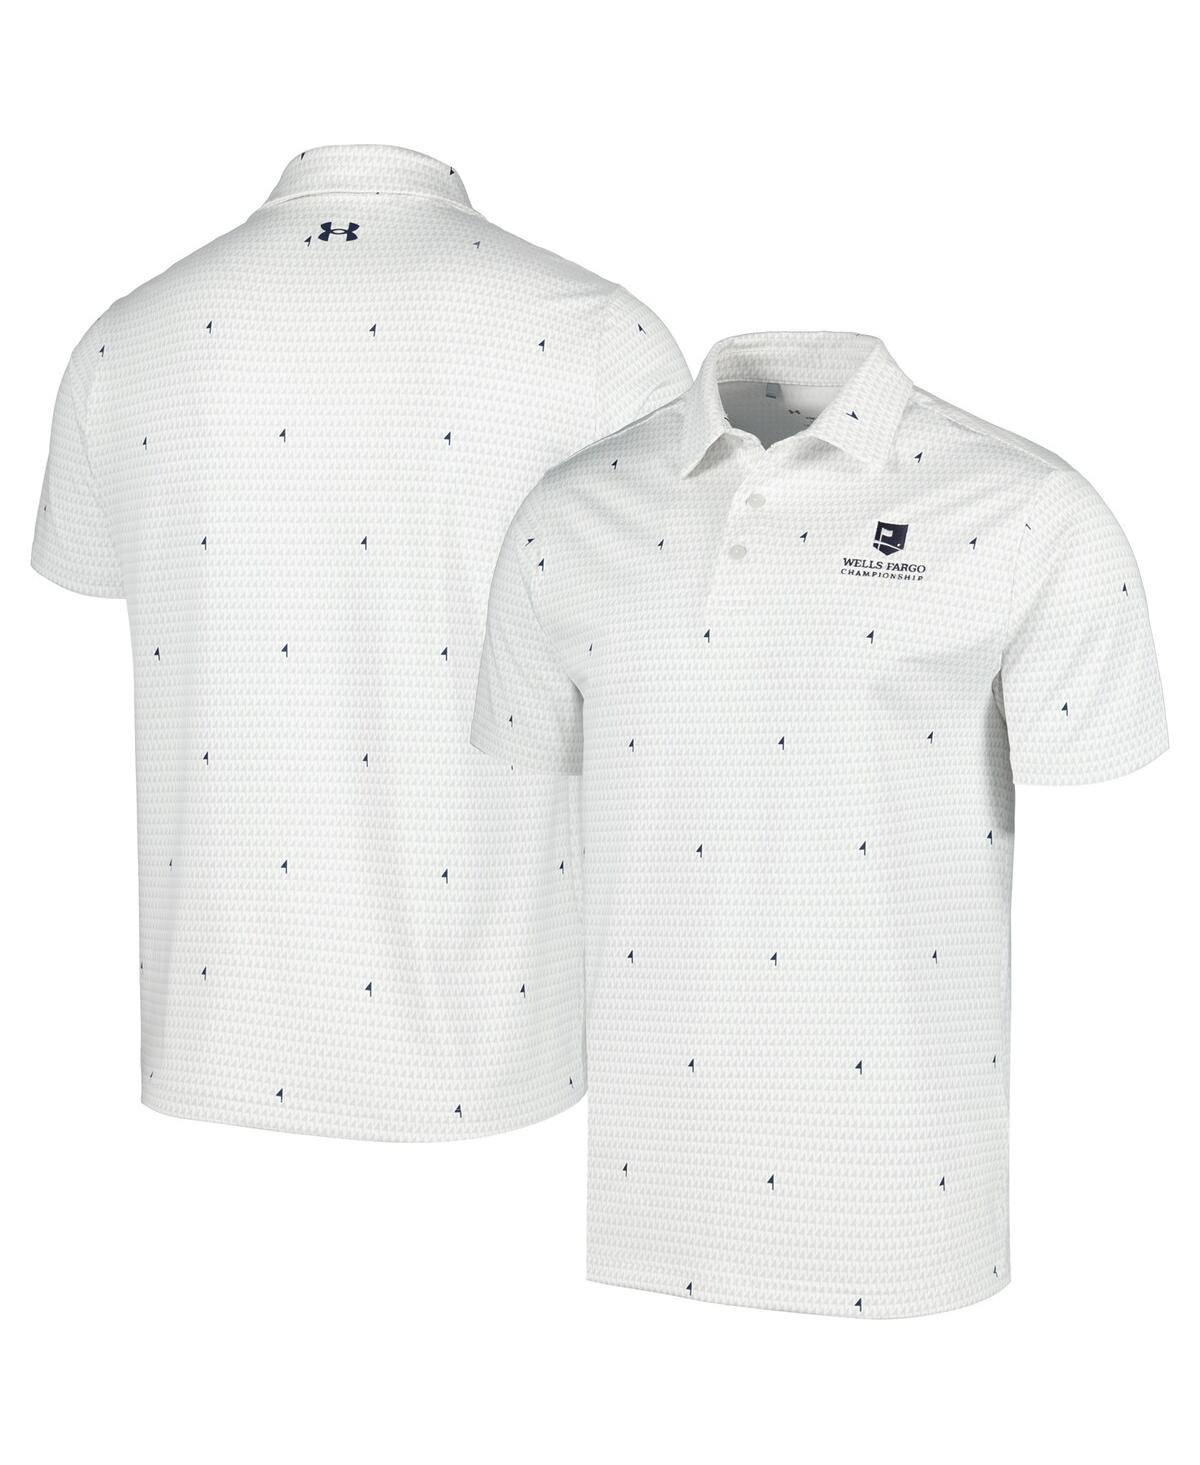 UNDER ARMOUR MEN'S UNDER ARMOUR WHITE WELLS FARGO CHAMPIONSHIP PLAYOFF PIN FLAG POLO SHIRT